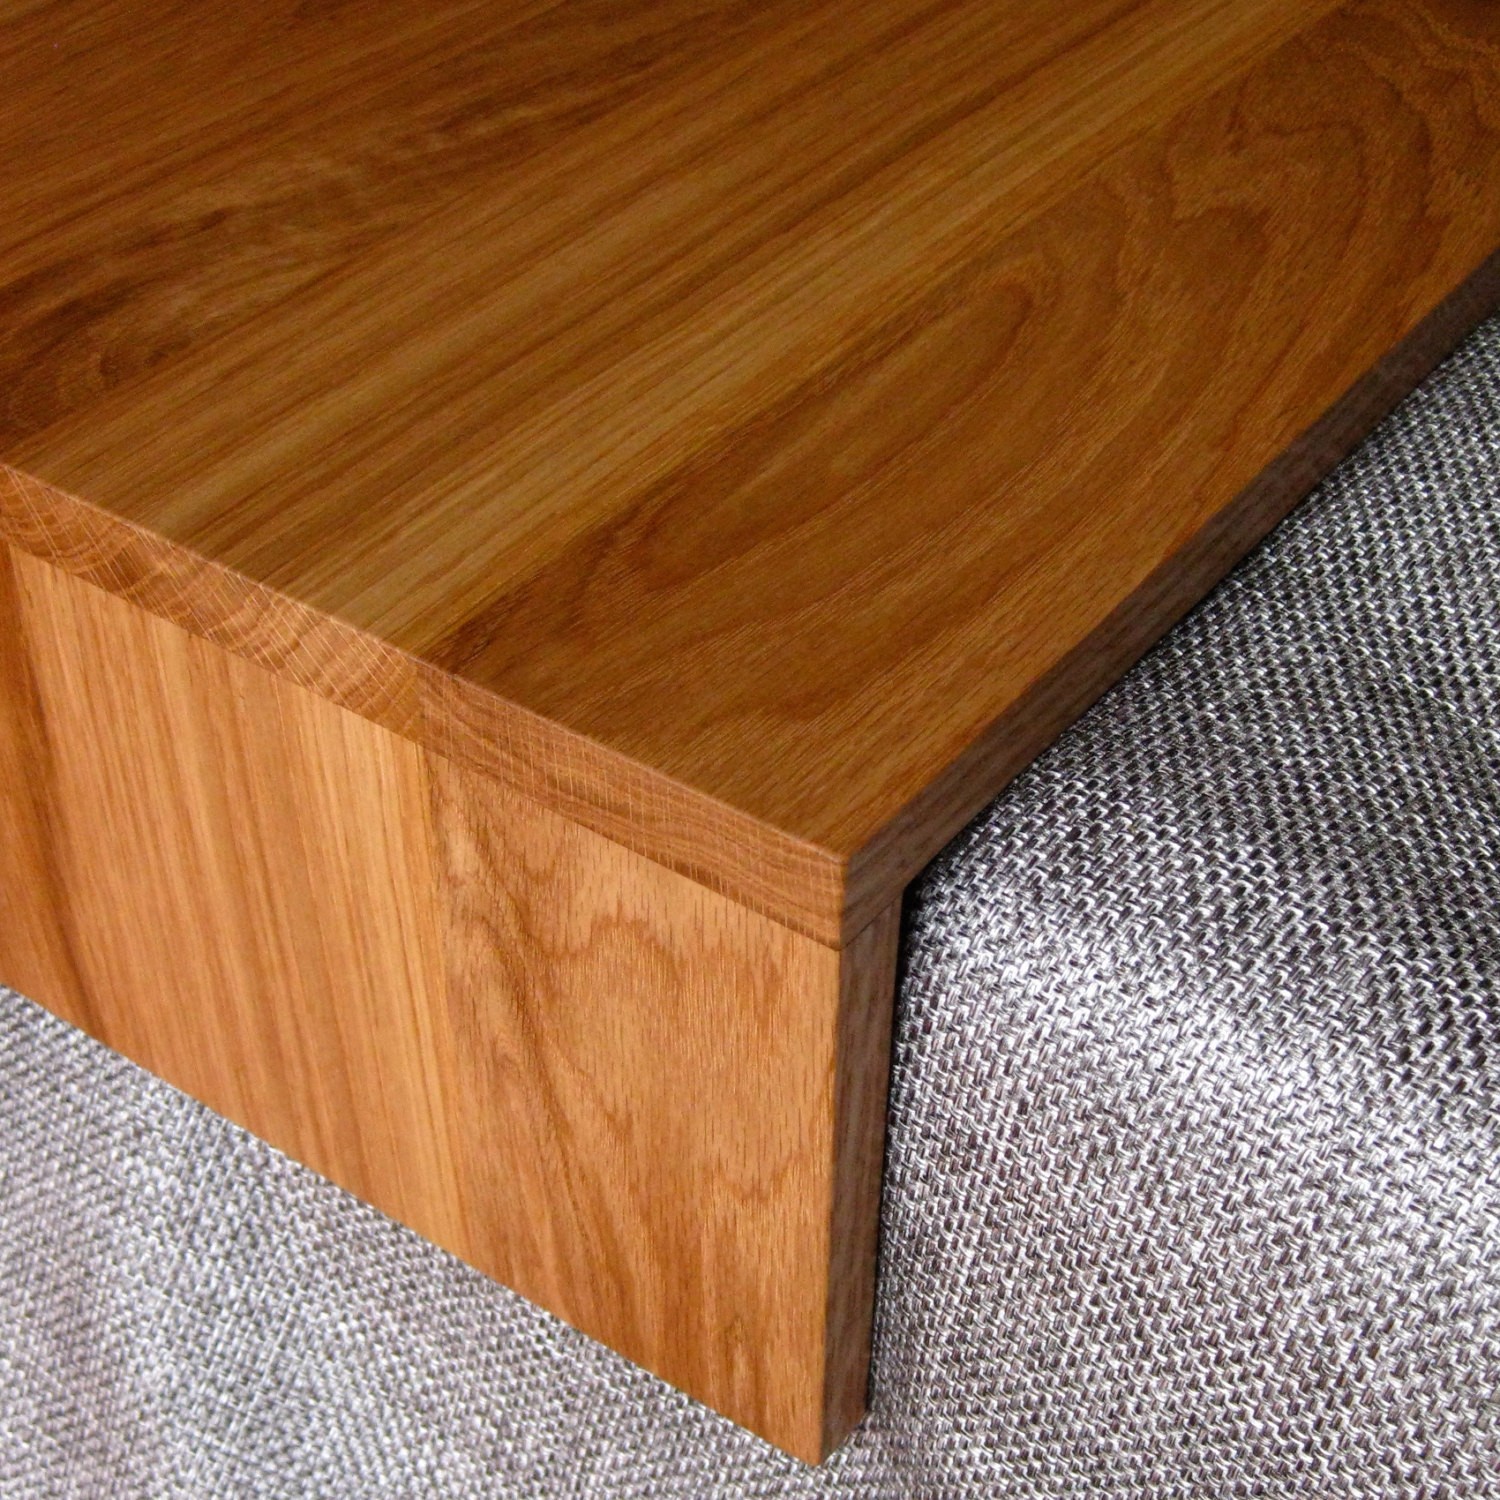 Ottoman wrap tray reclaimed wood drink rest table for couch